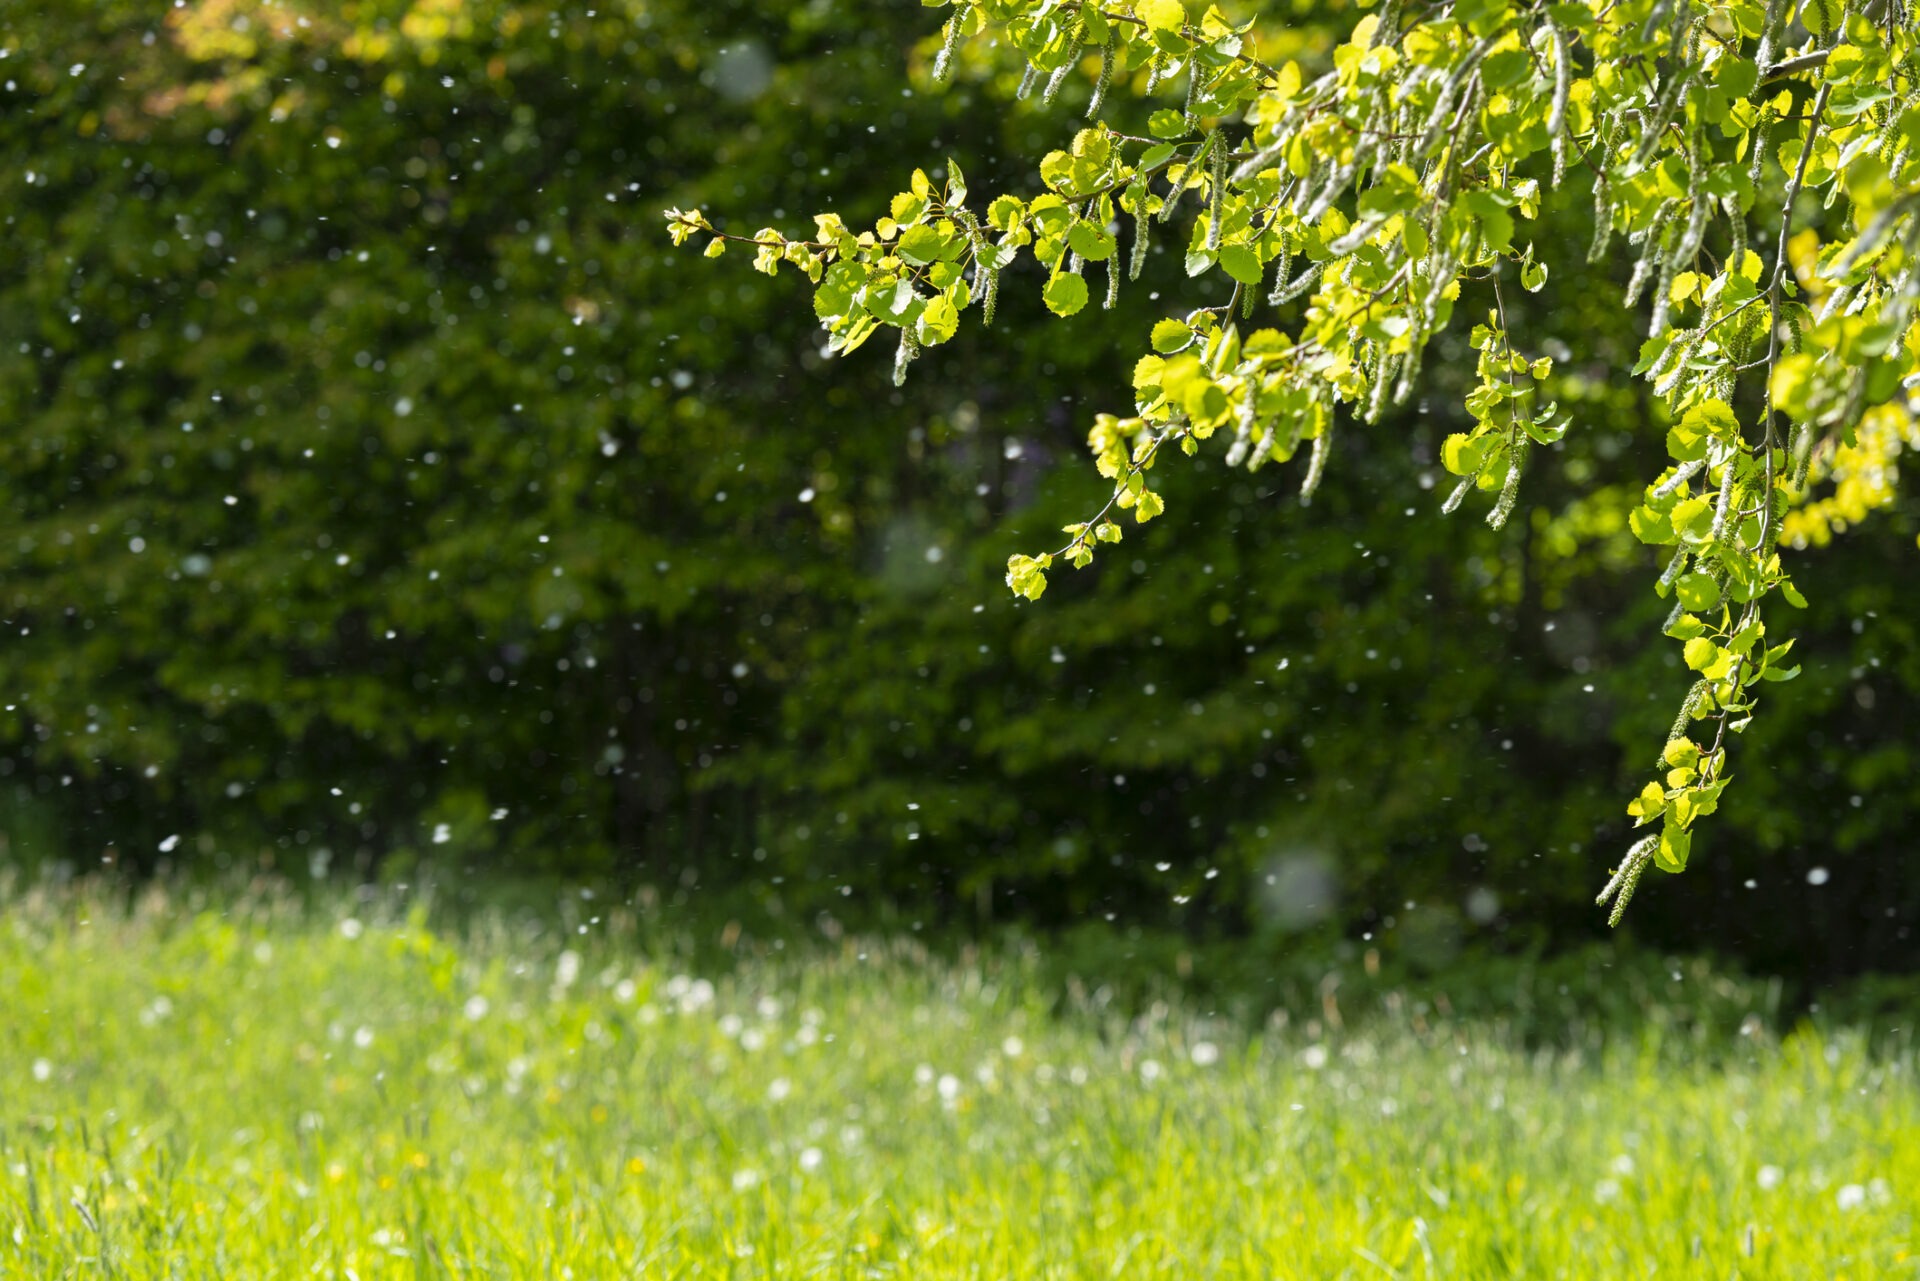 Sunlight filters through fresh green leaves with raindrops sparkling in the air, against a backdrop of trees and a lush grassy field.